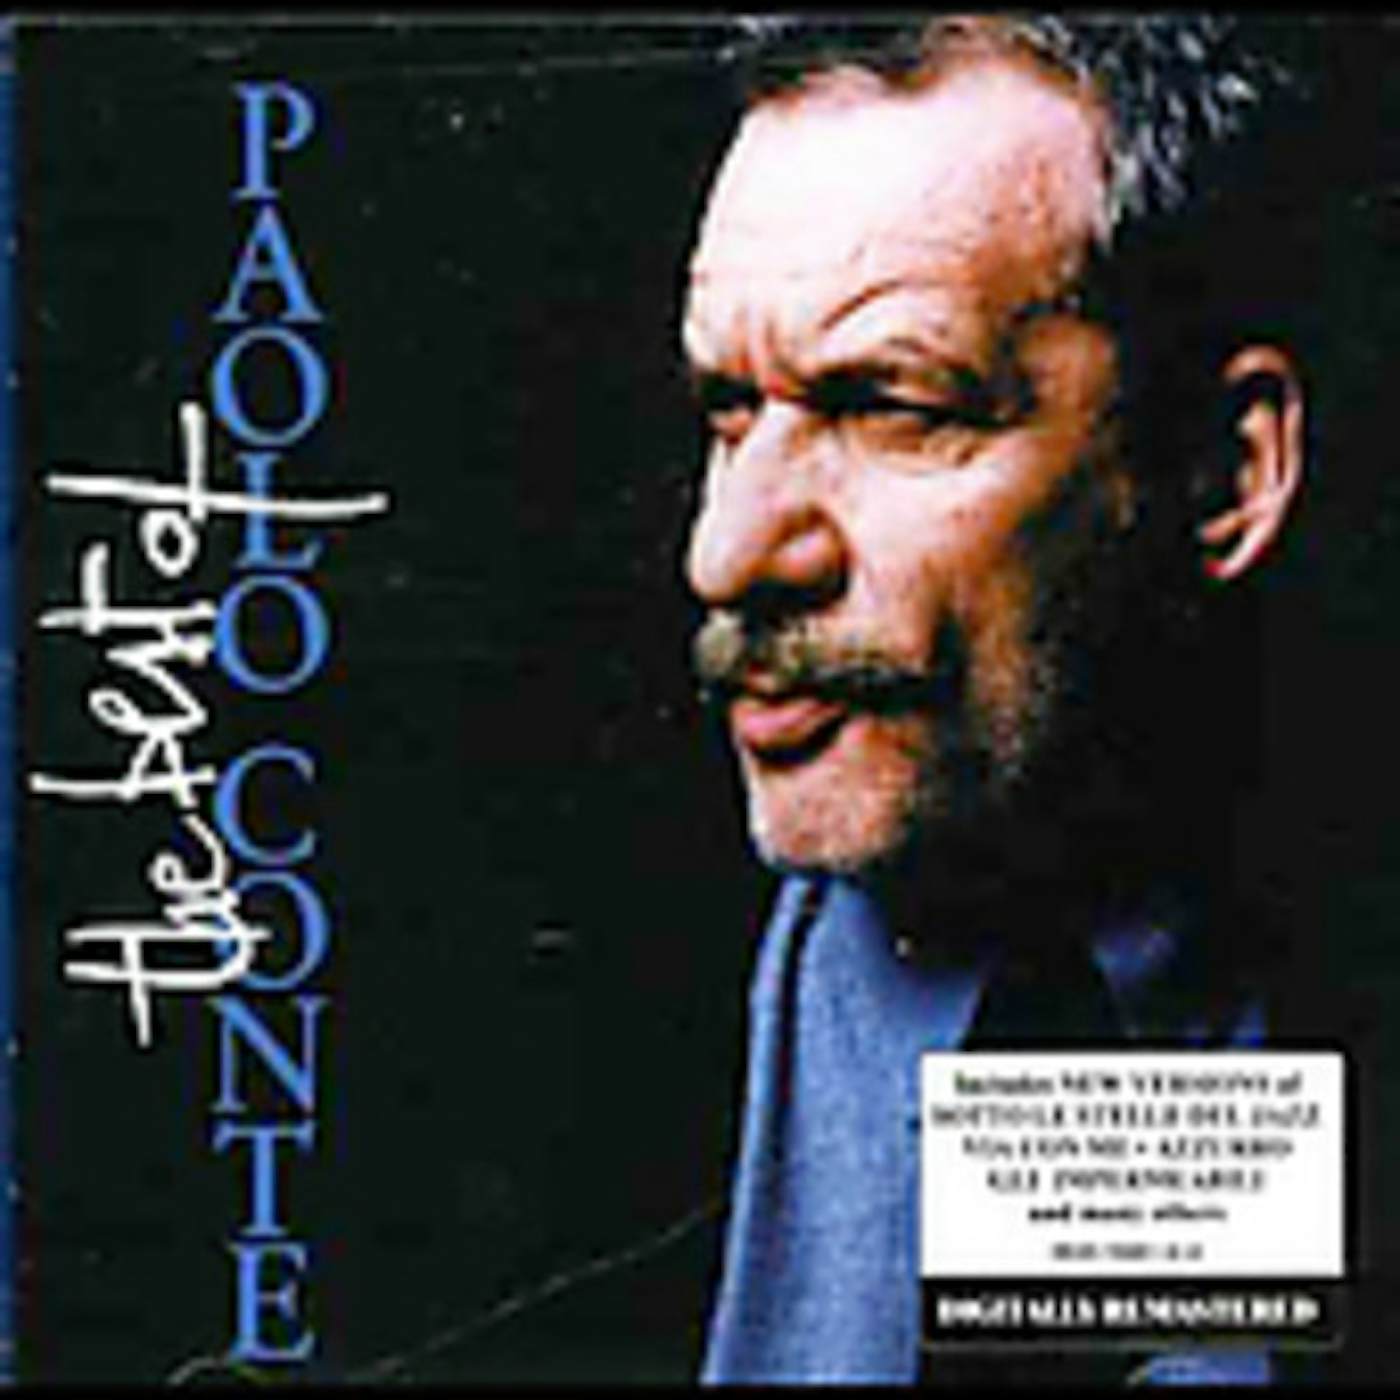 THE BEST OF PAOLO CONTE CD